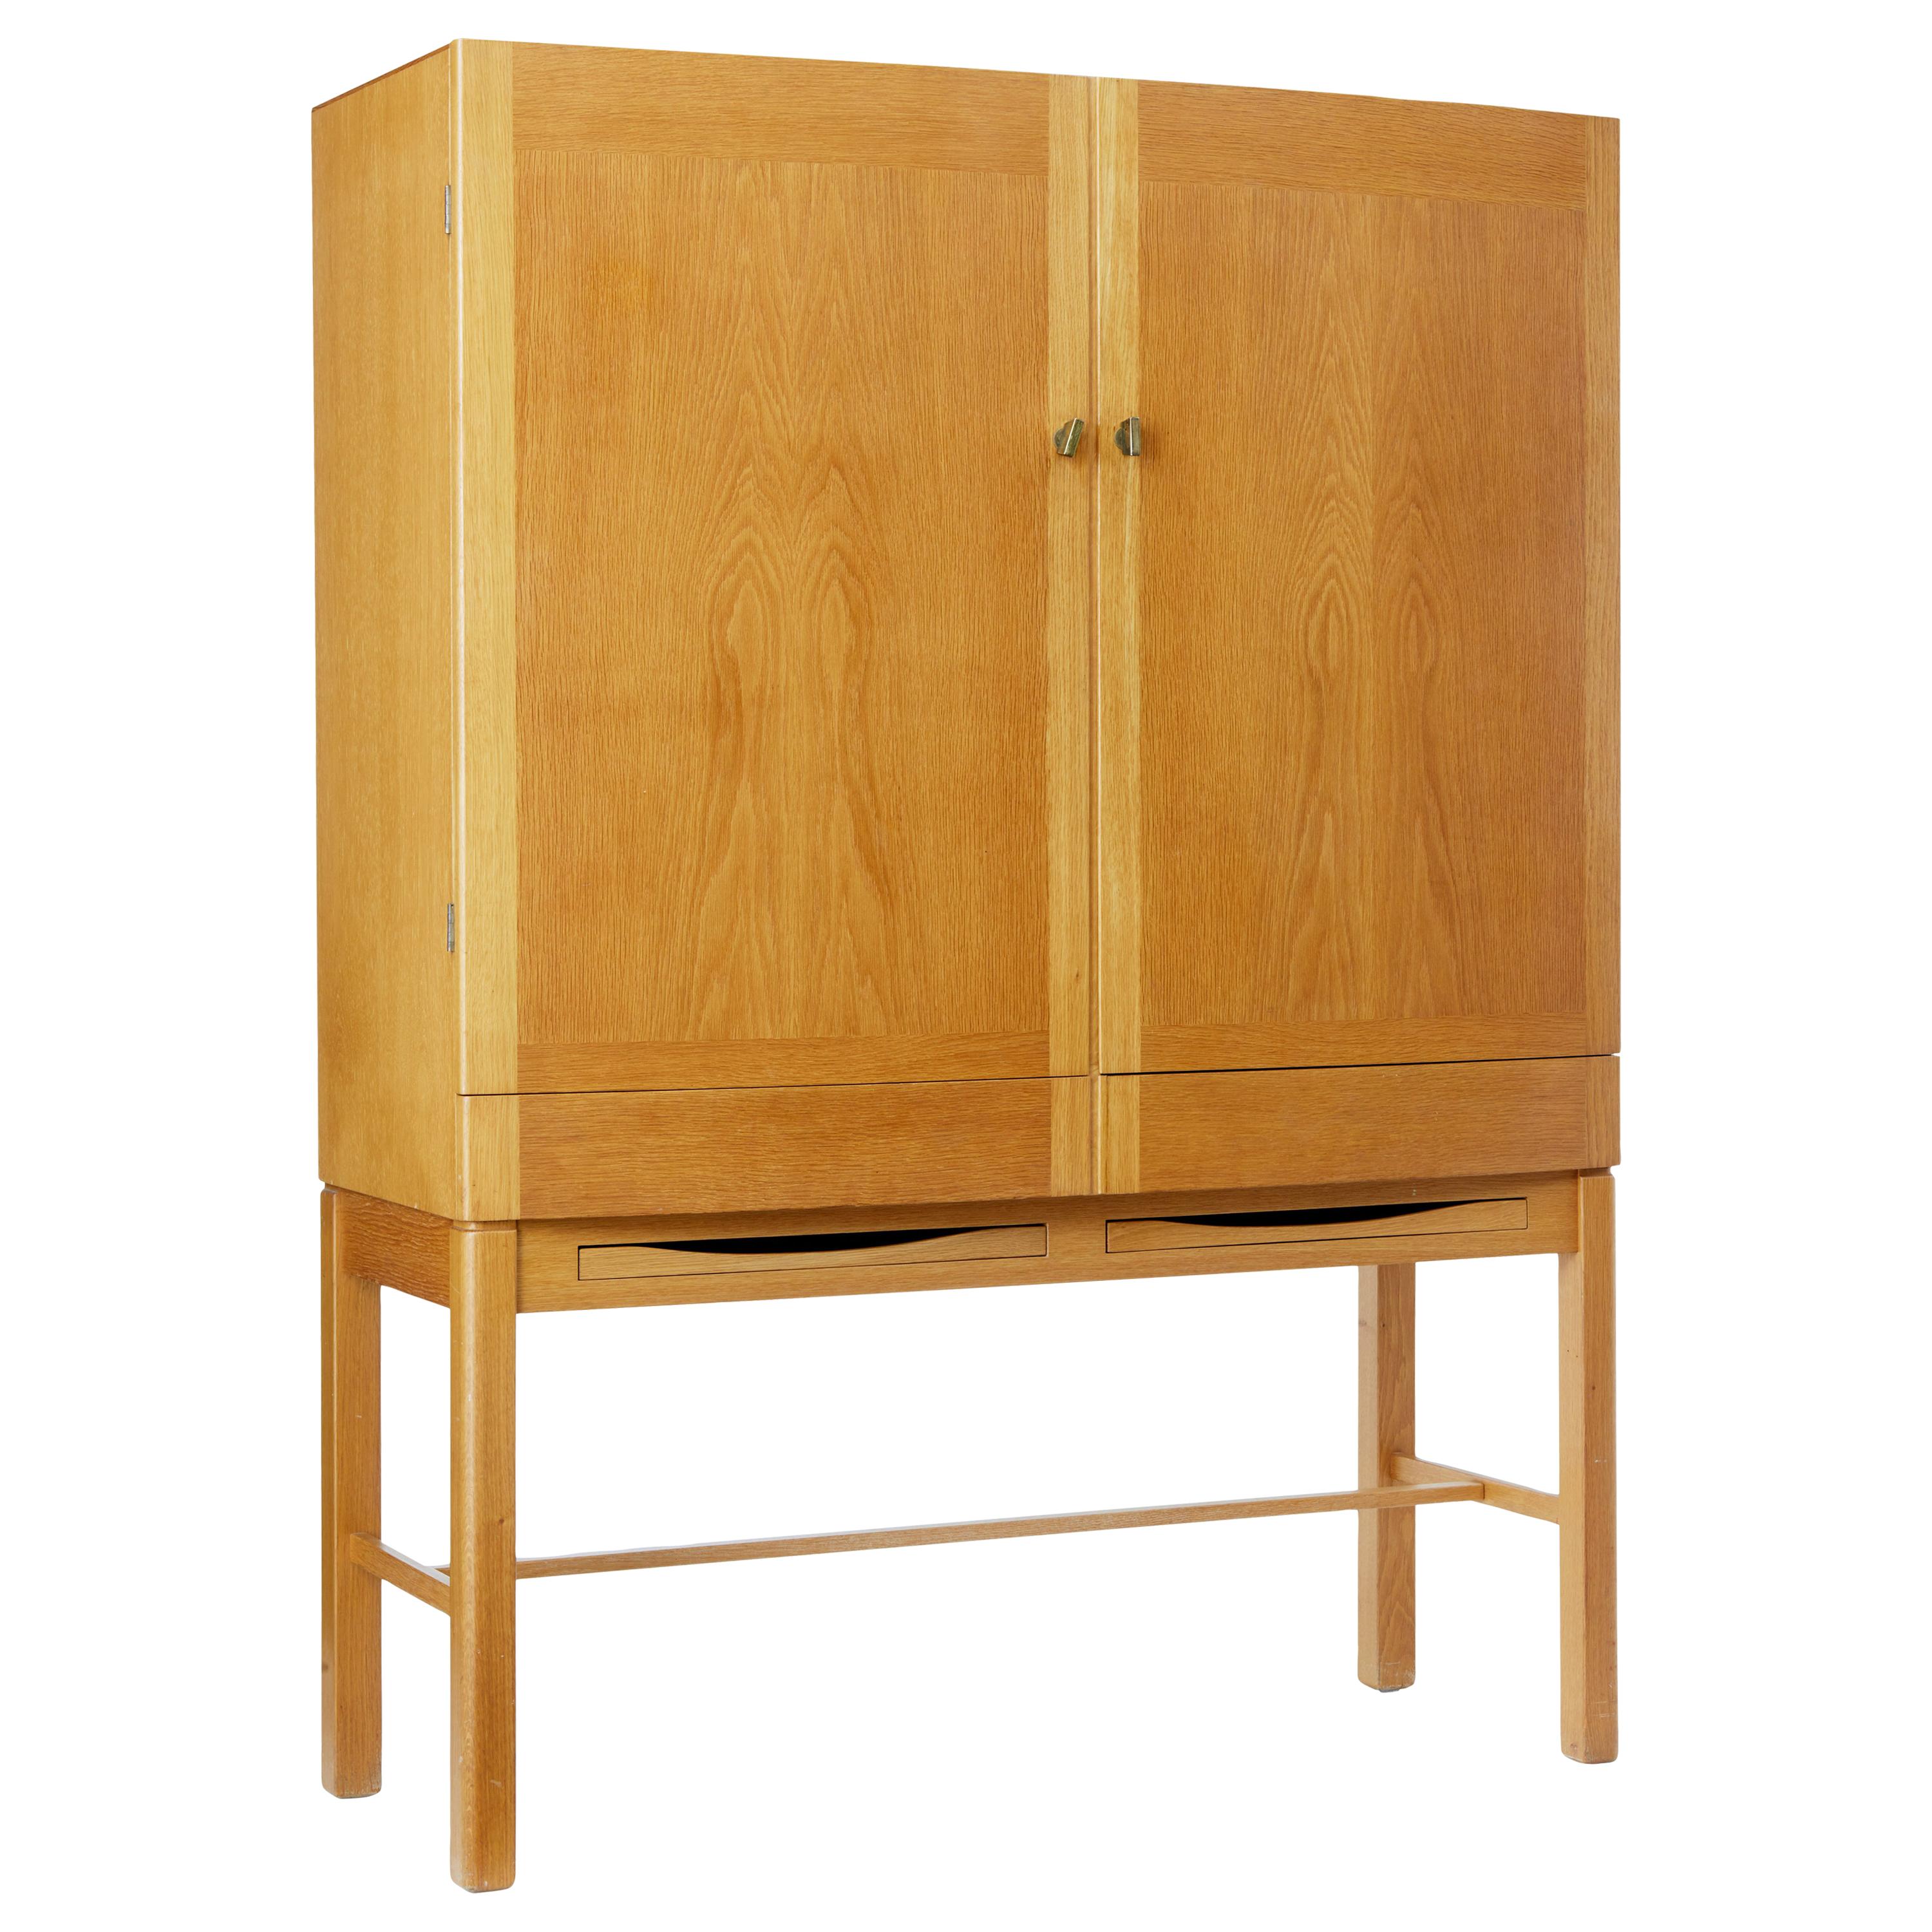 1960's Oak Cabinet on Stand by Gunnar Mystrand for Kallemo